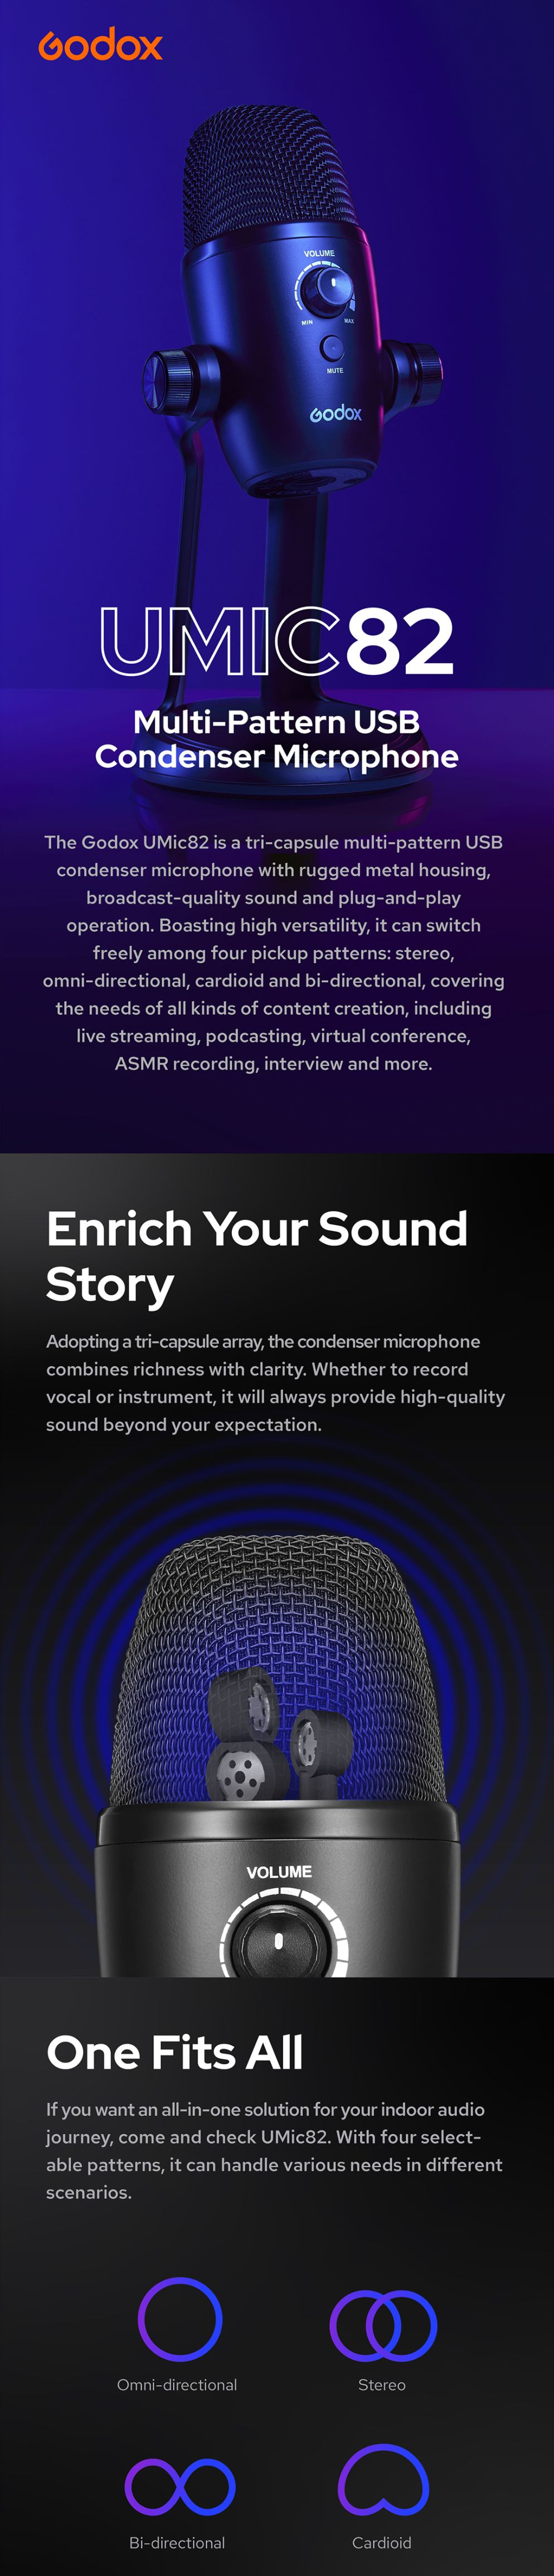 UMIC82 Enrich your sound story, one fits all